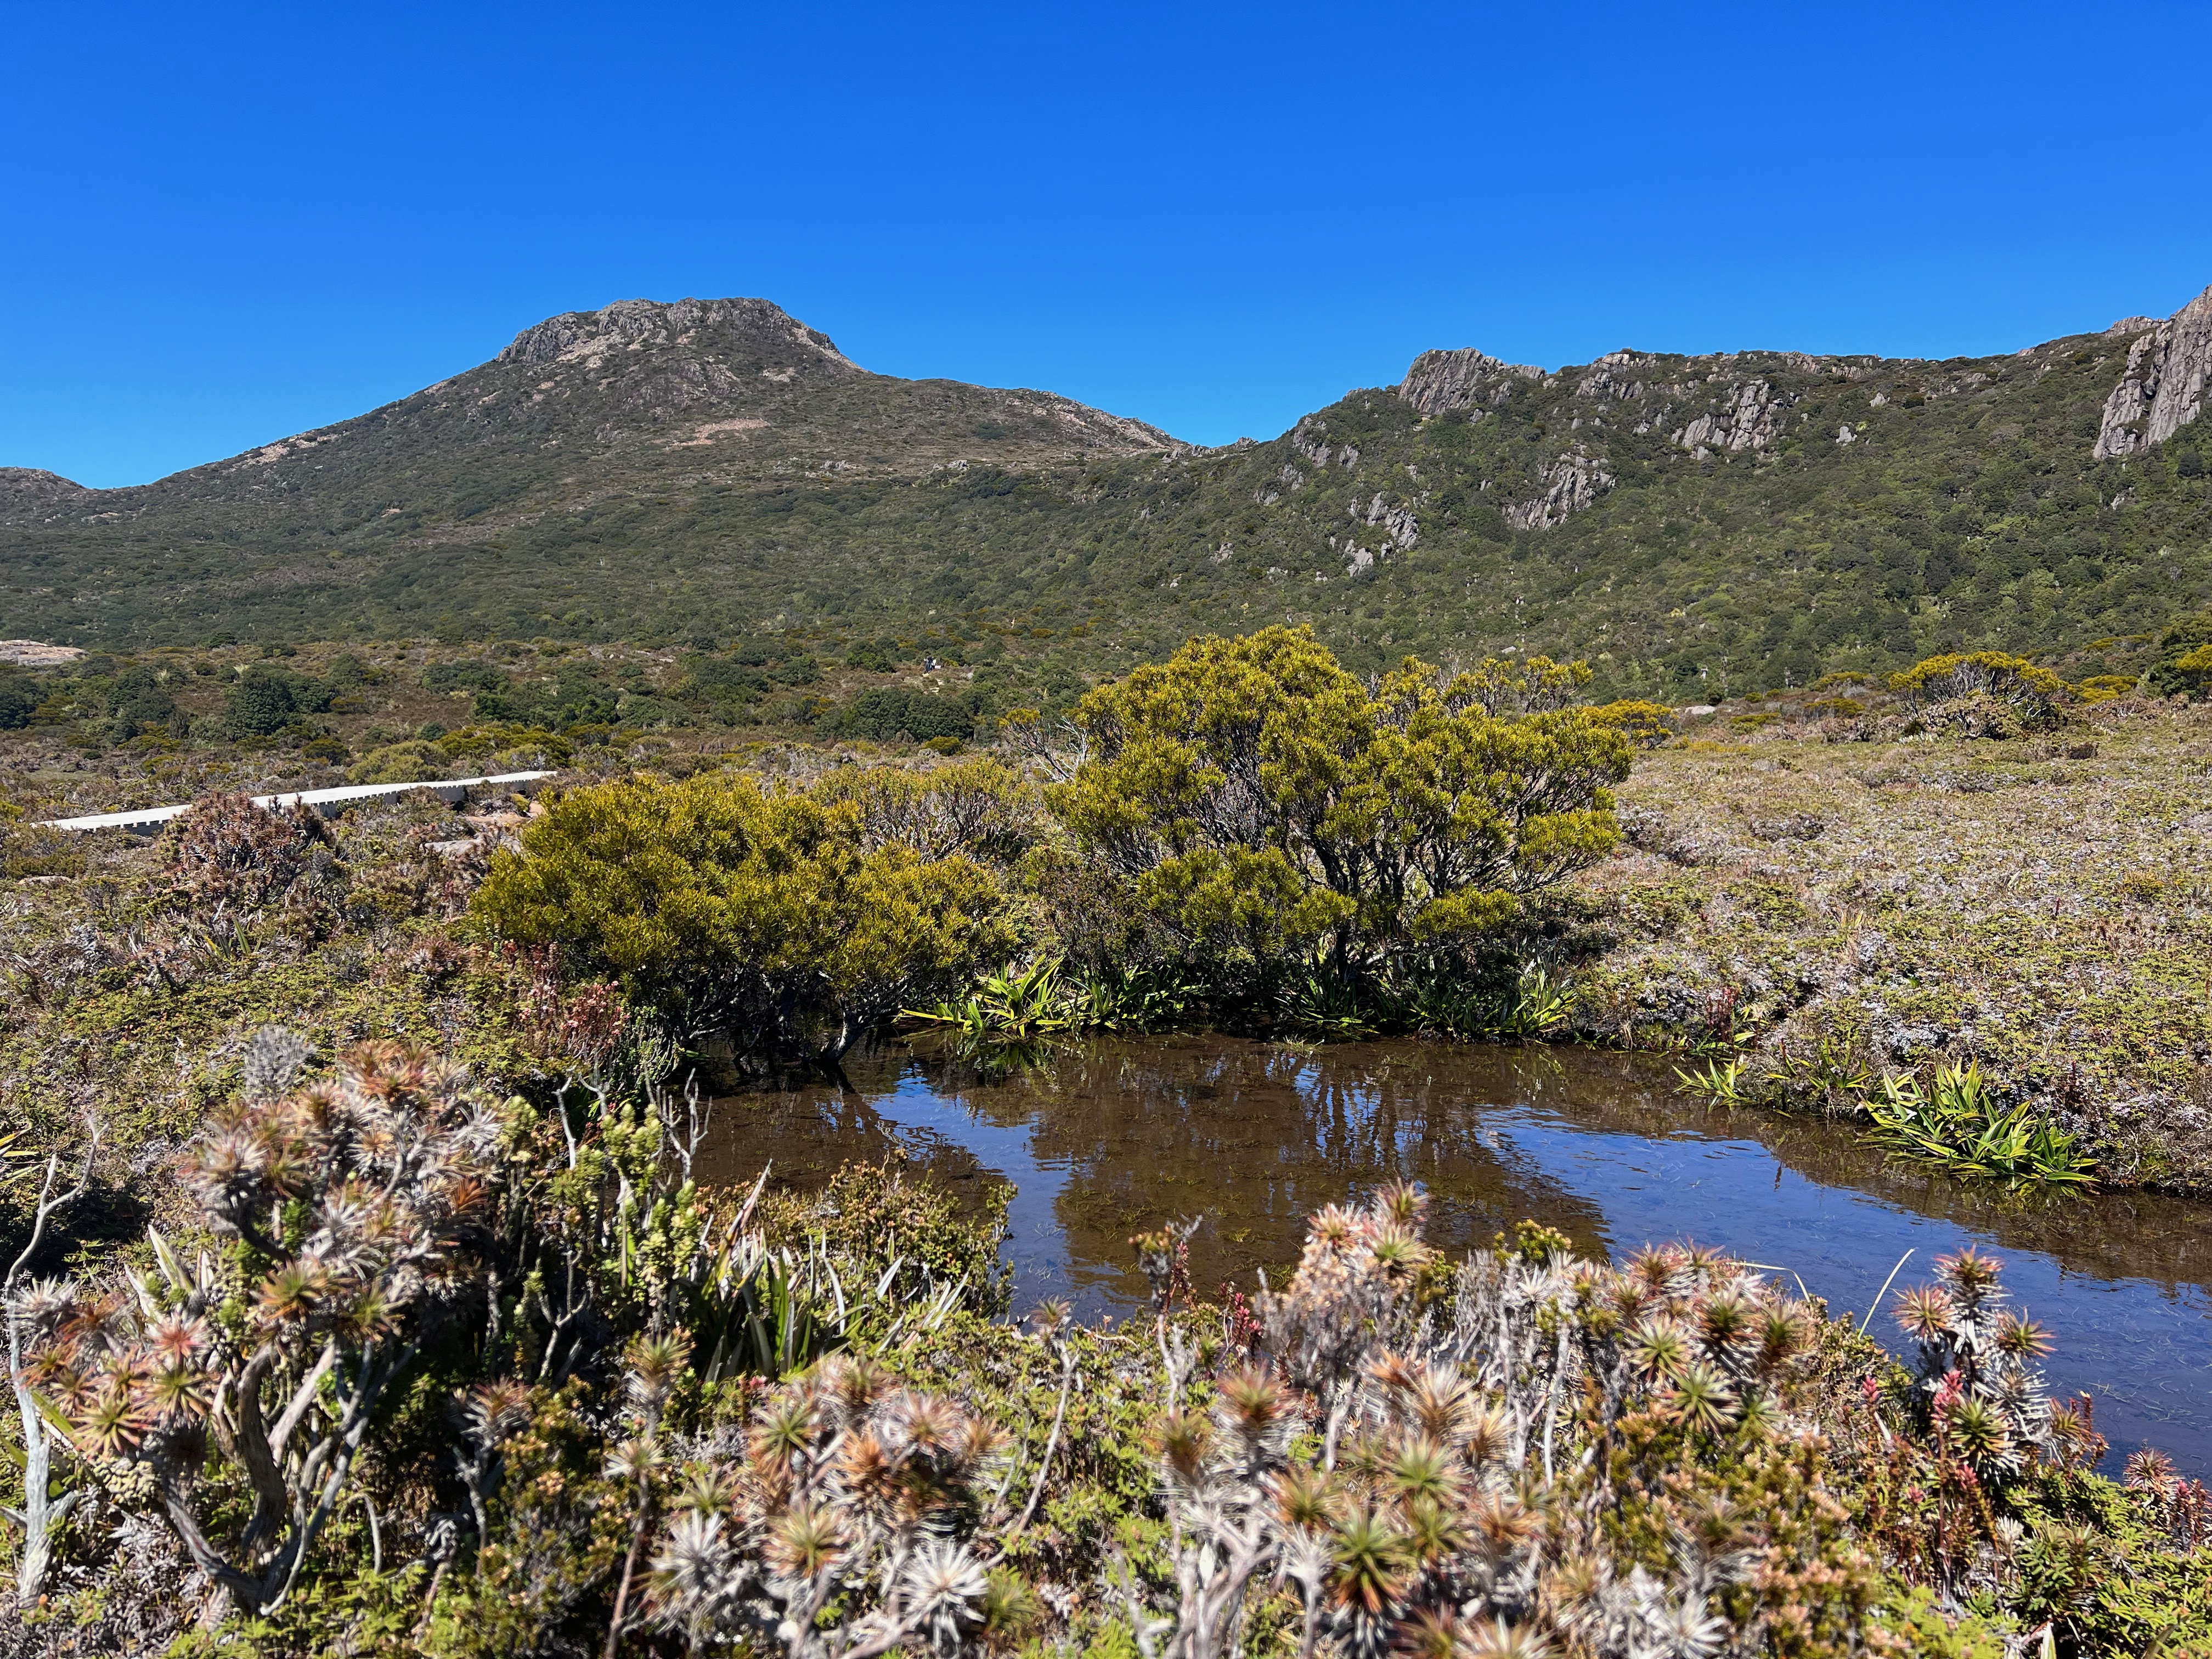 Hartz Peak in the background, with a bush and a small pond in the foreground